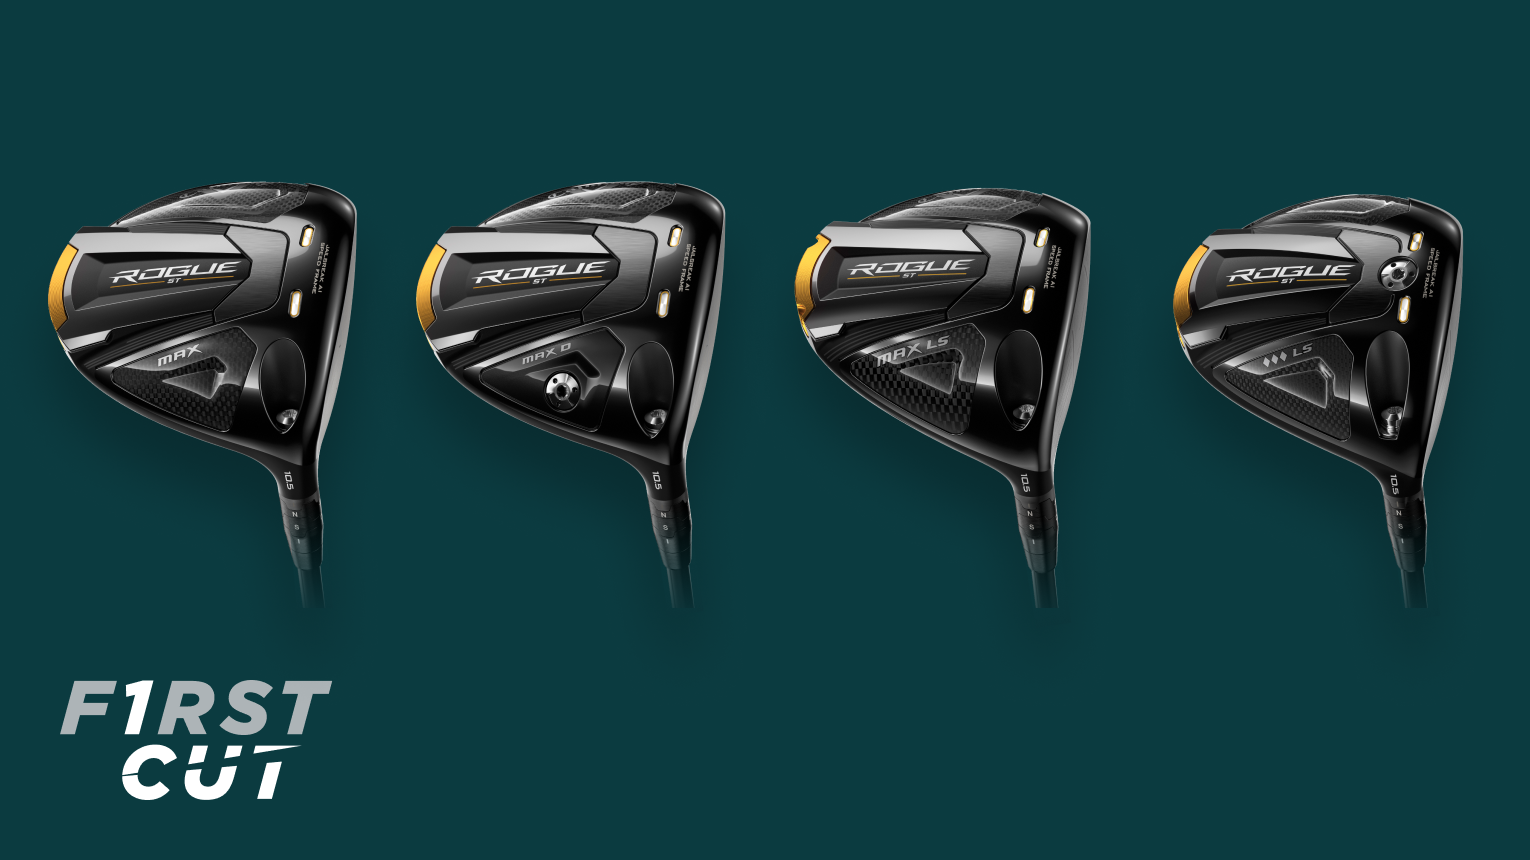 Callaway Rogue ST drivers: What you need to know | Golf Equipment